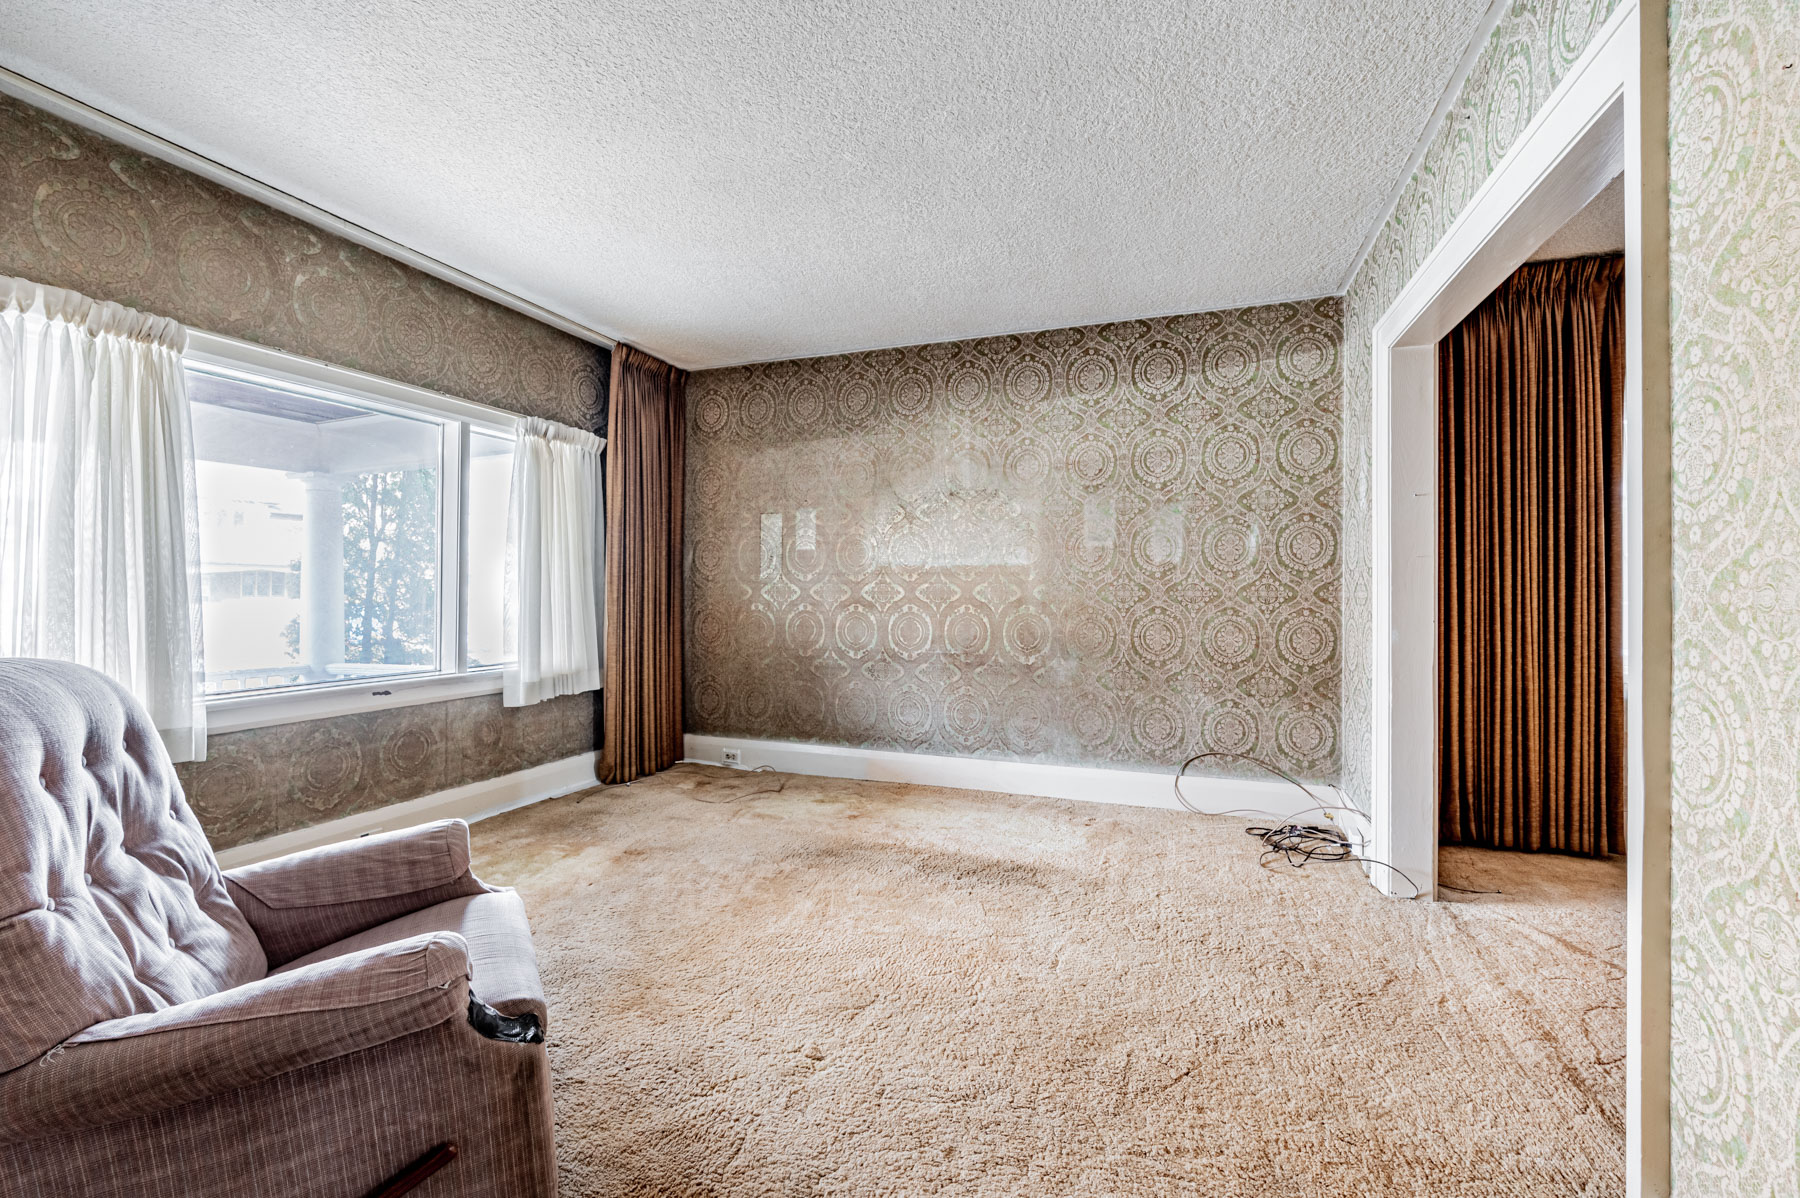 House living room with broadloom carpet, wallpaper and large window.